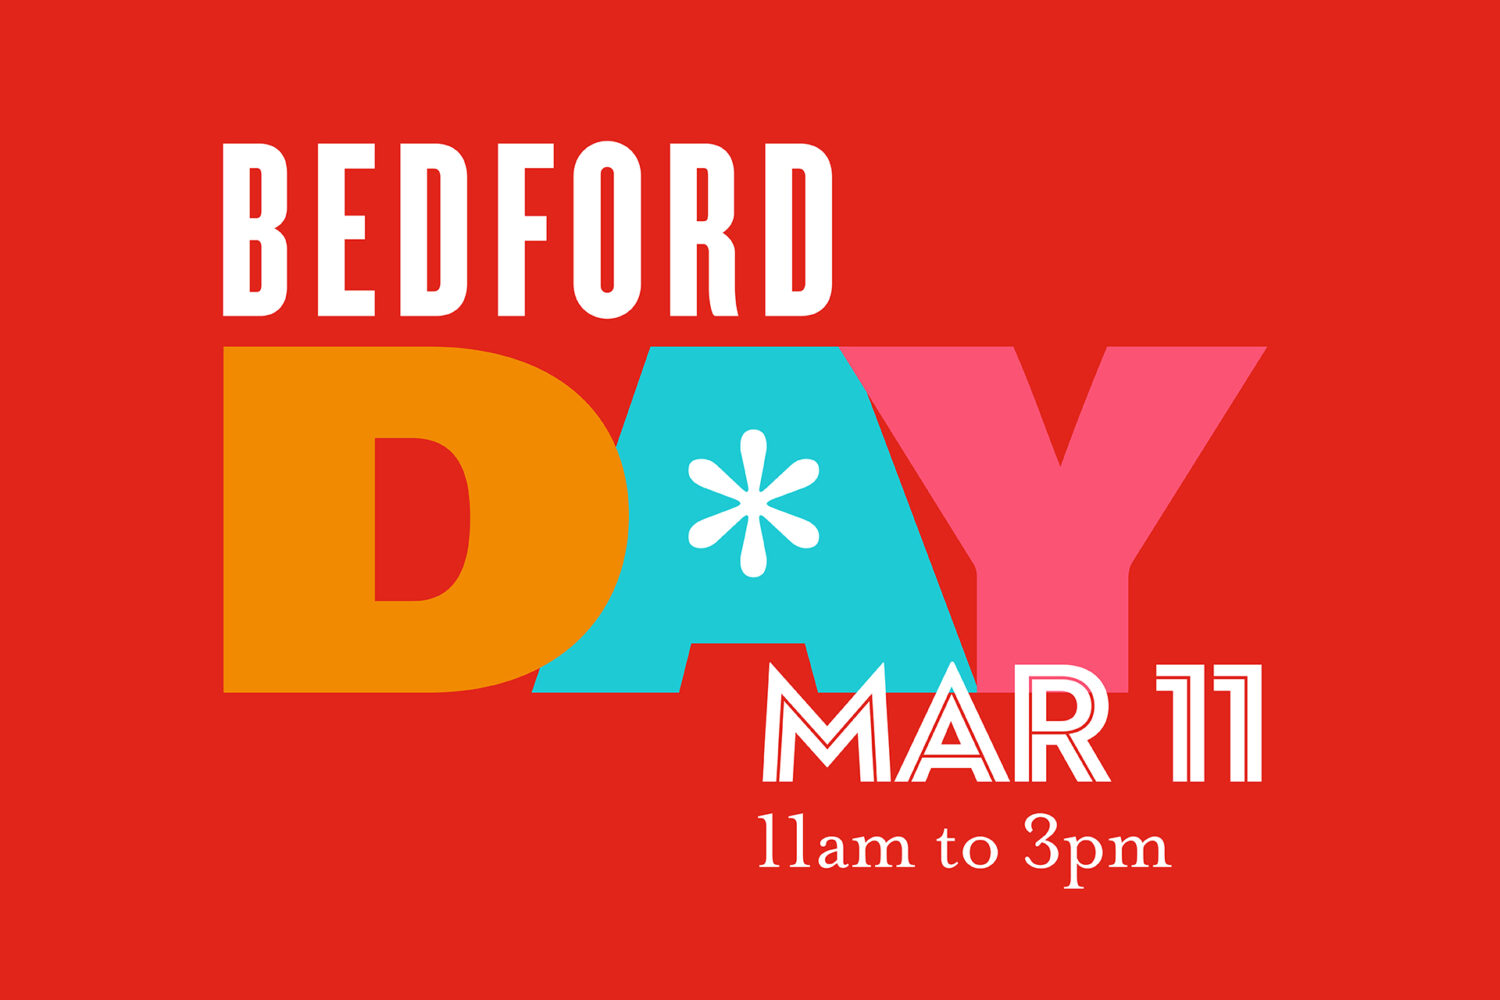 Bedford Day is Here…